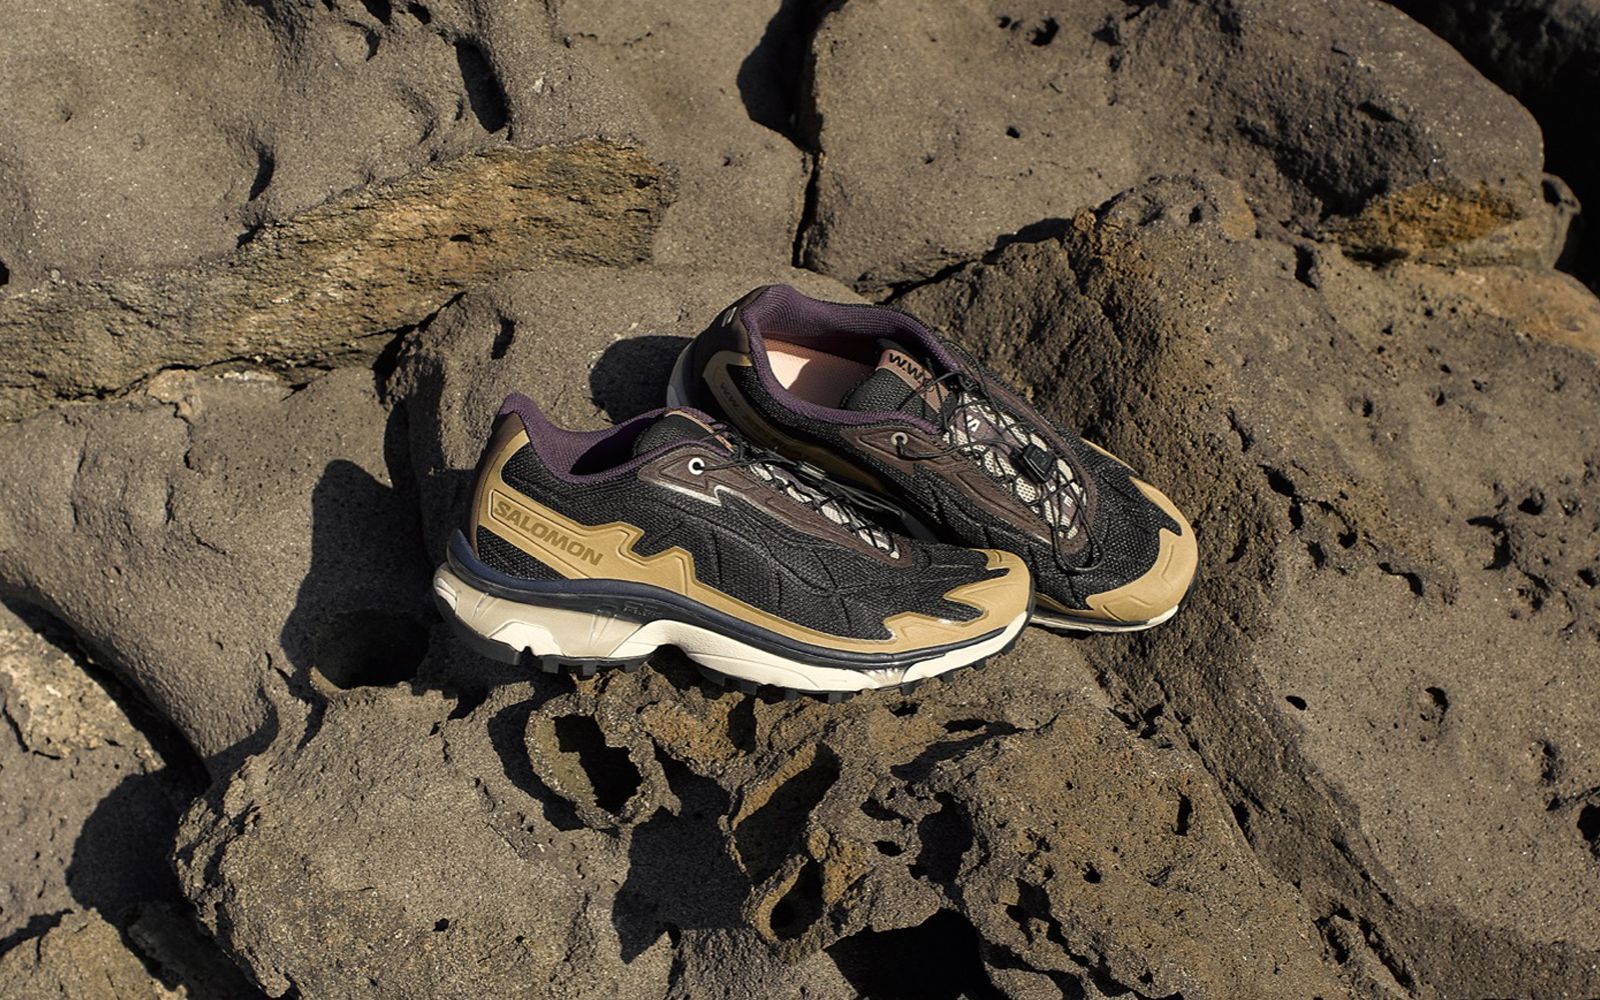 The Salomon XT-Slate in collaboration with WOOD WOOD